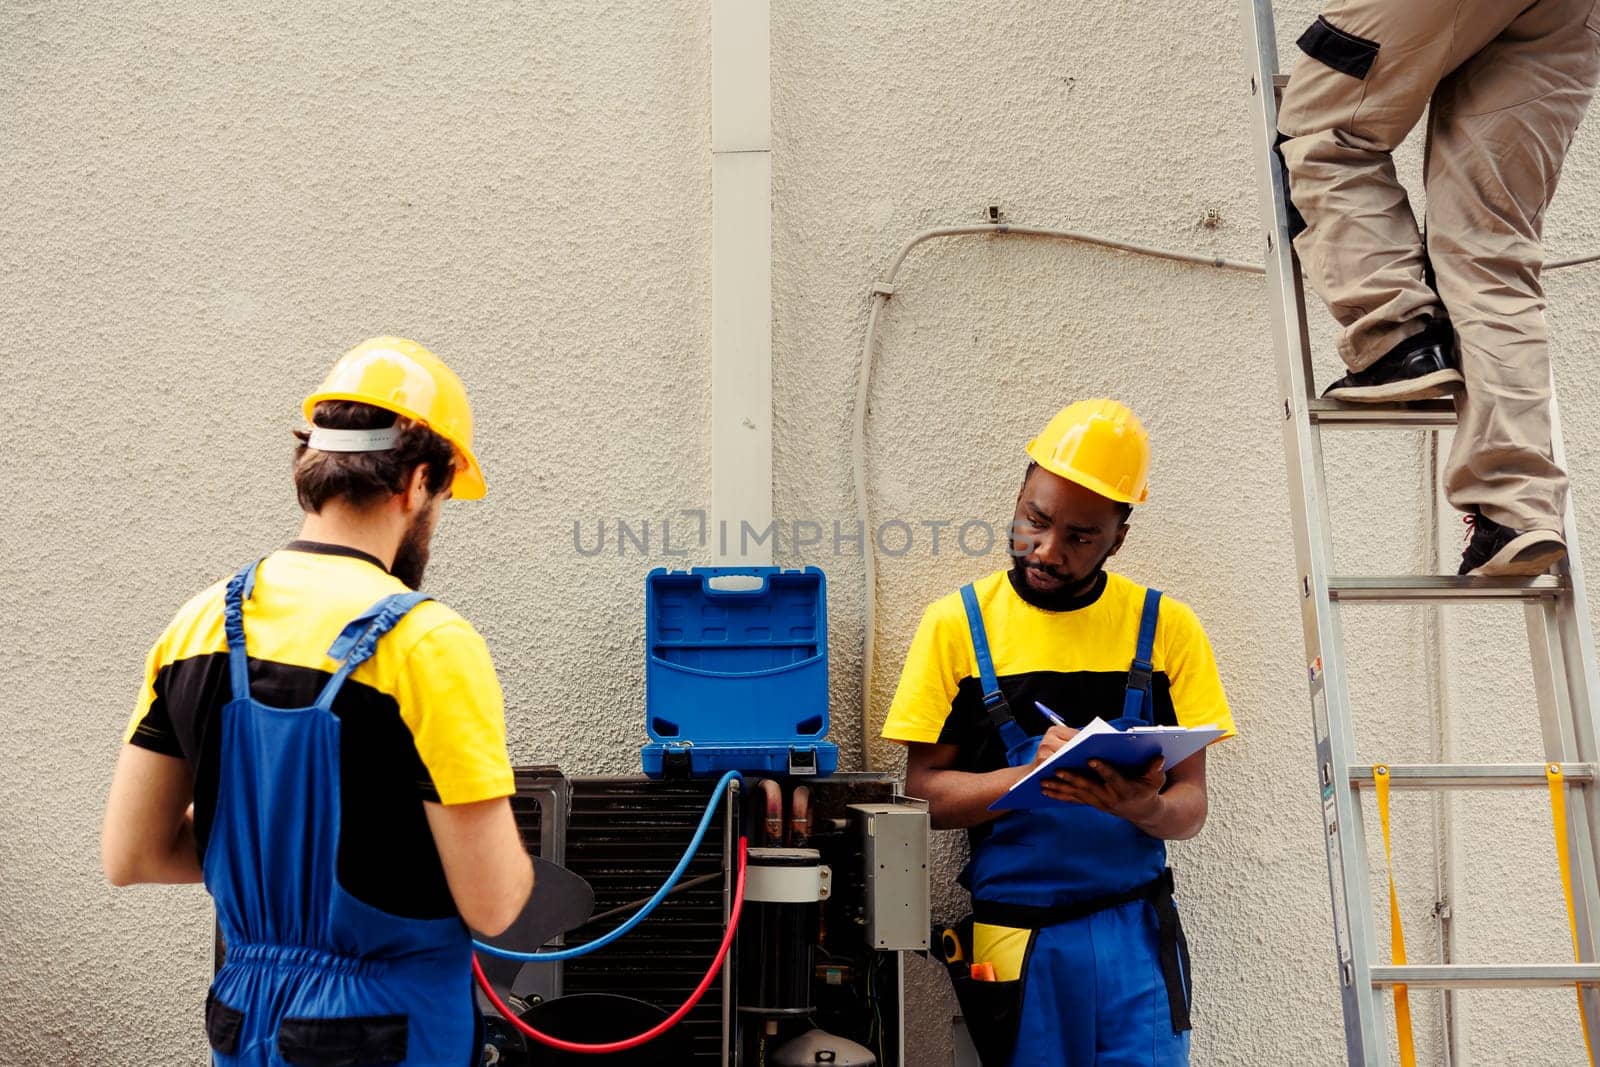 Proficient expert using professional pressure benchmarking tools to check liquids and gases in hvac system while licensed electrician writes condenser analysis report on clipboard